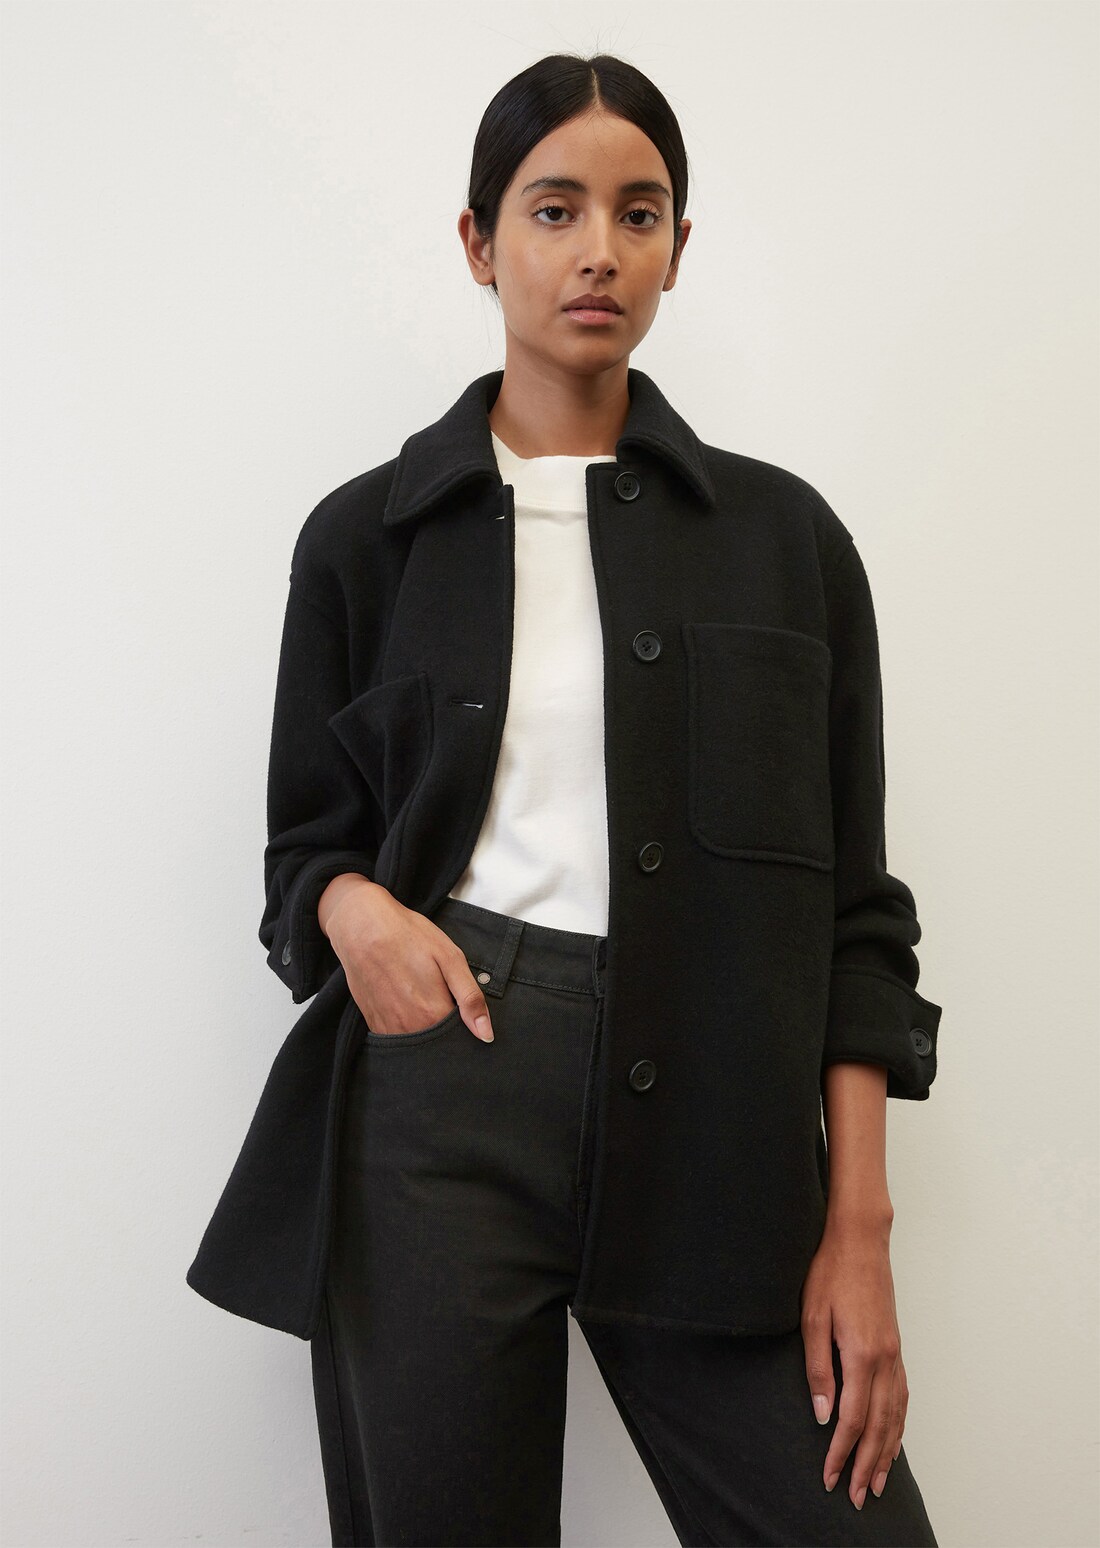 Shacket, relaxed fit made of wool blend jersey - black | Wool jackets ...